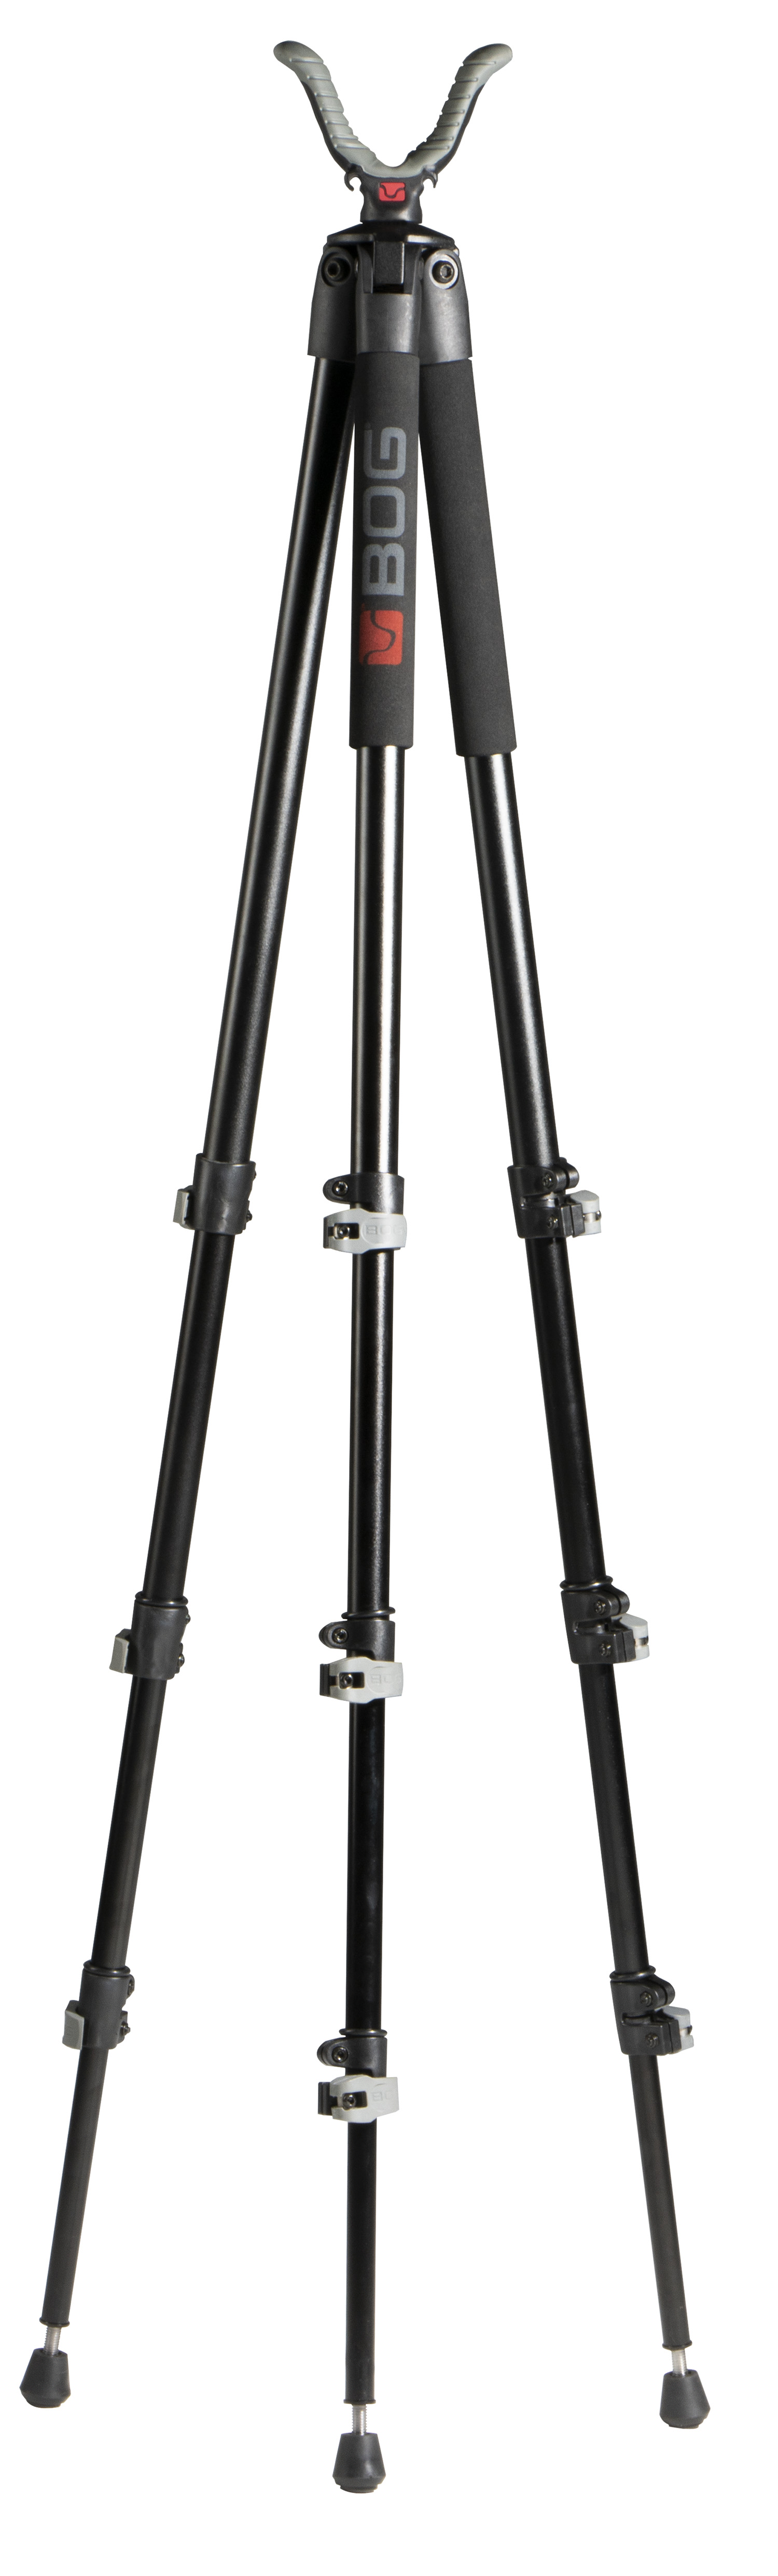 Bog-Pod 1100482 Adrenaline Shooting Tripod made of Black Finish Aluminum with Foam Grip, Rubber Feet, 360 Degree Pan, 25 Degree Cant & 16-72